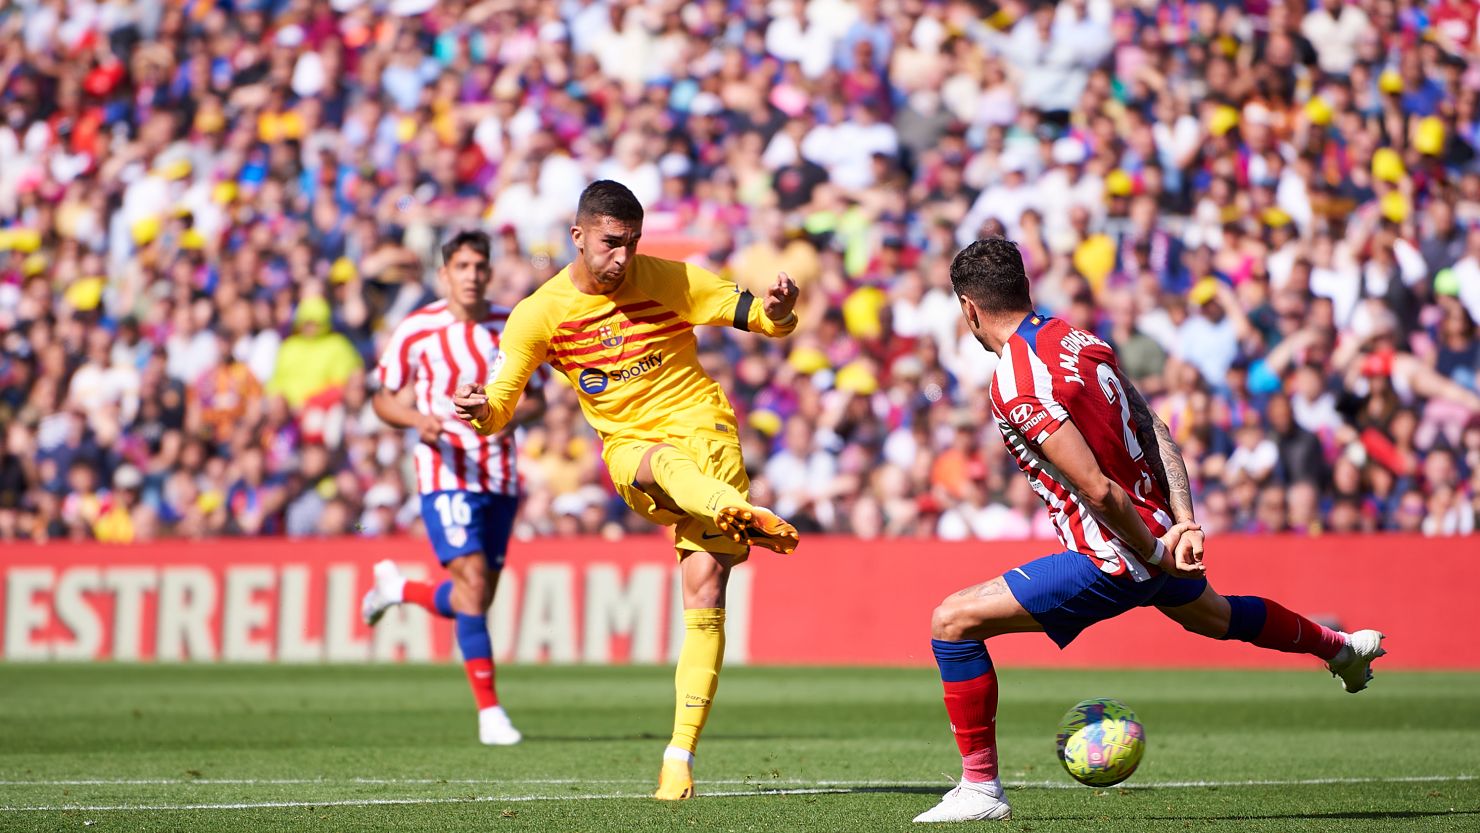 Ferran Torres of FC Barcelona  scores his team's first goal during the LaLiga Santander match between FC Barcelona and Atletico de Madrid at Spotify Camp Nou on April 23, 2023 in Barcelona, Spain.